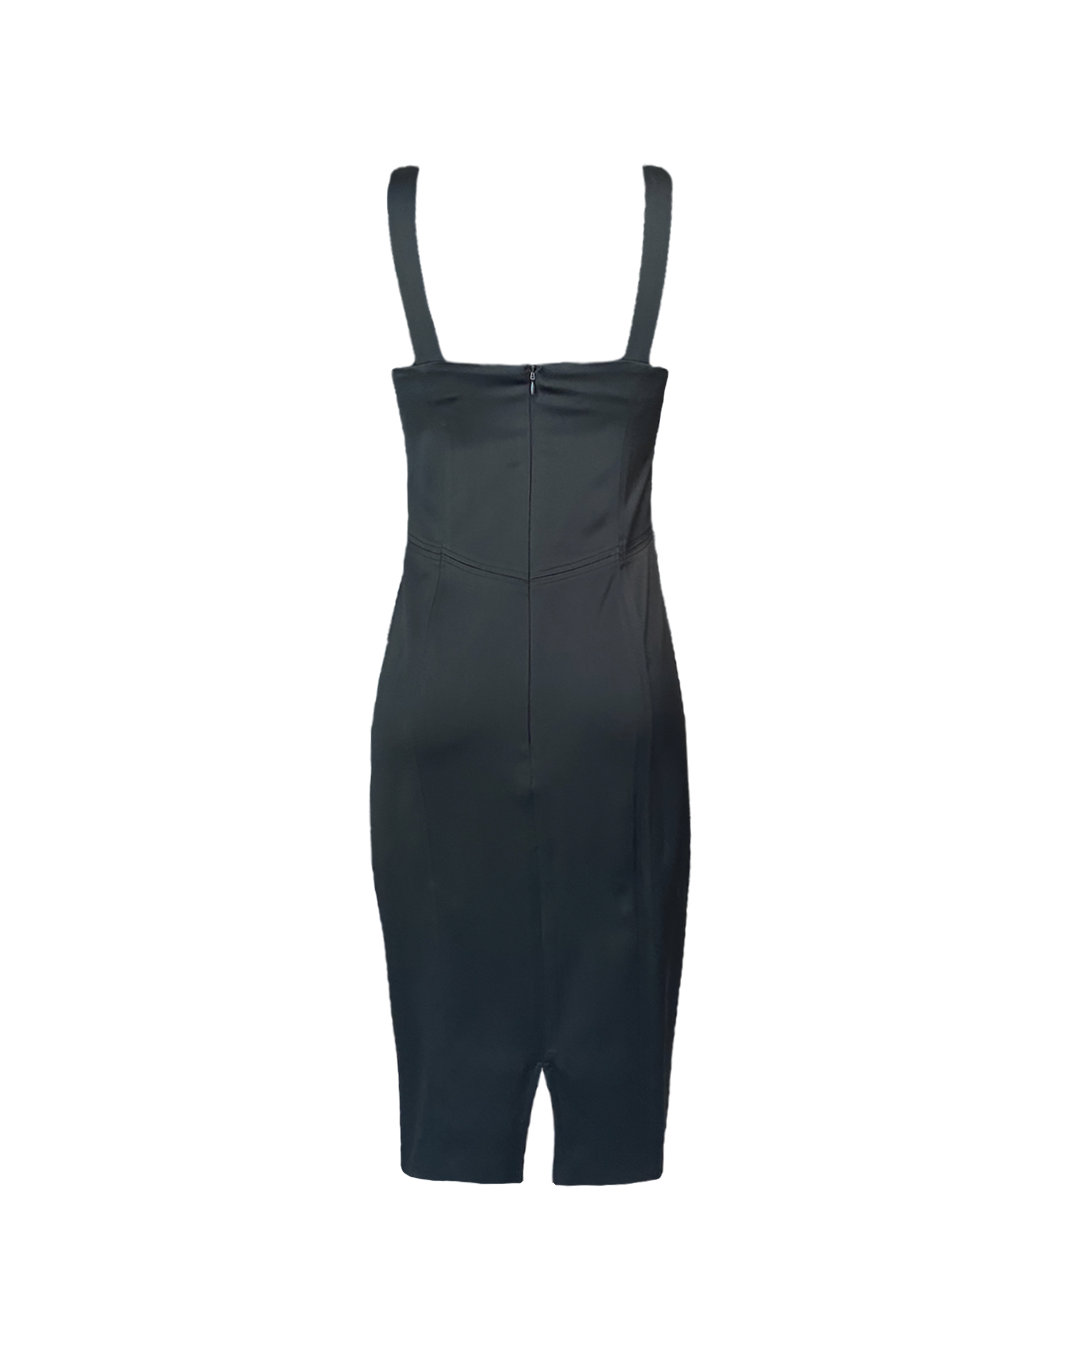 BLACK ATLAS VISCOSE COCKTAIL DRESS WITH CORSET DETAIL AW23/24